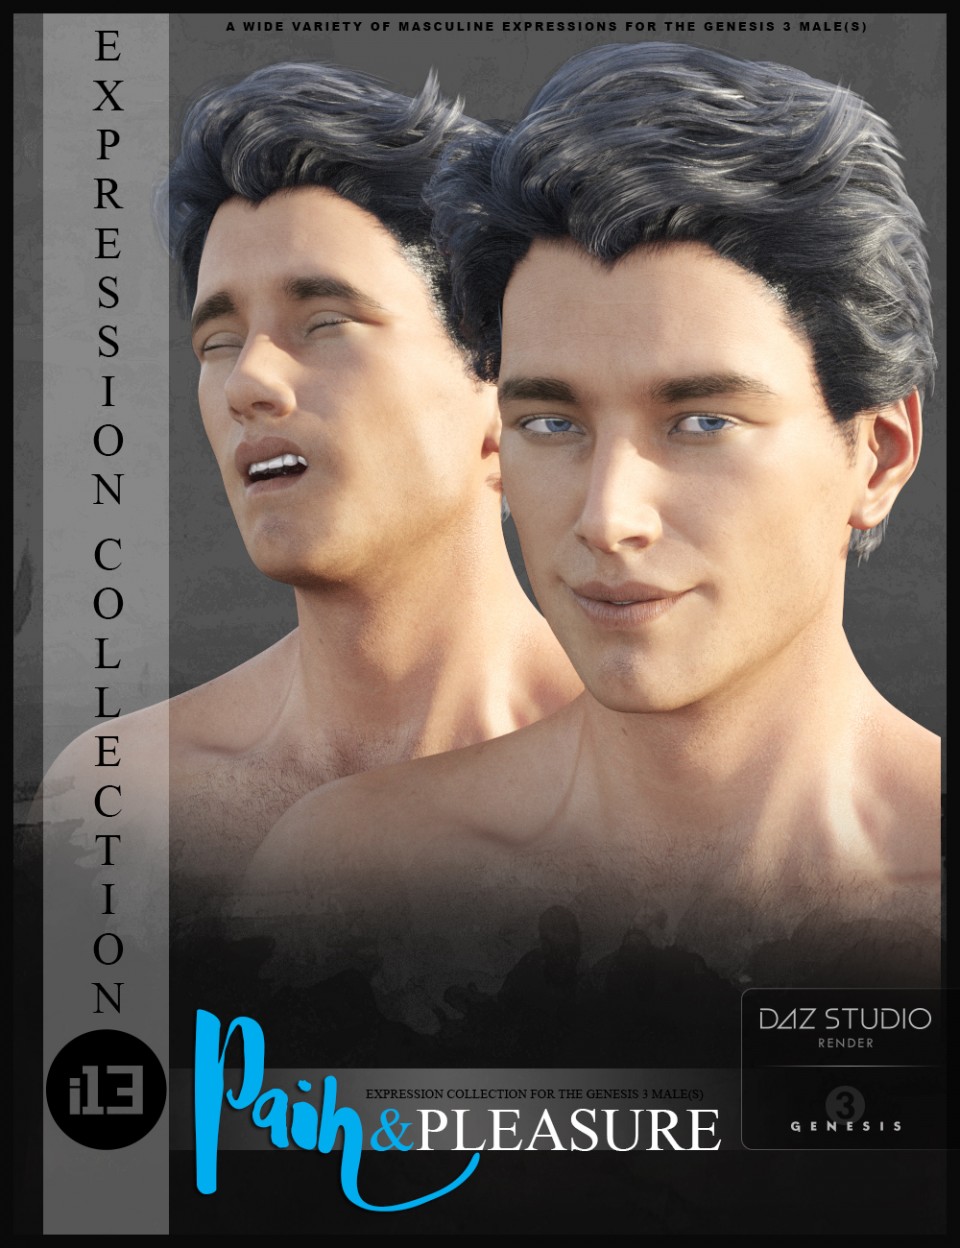 i13 Pain and Pleasure Expressions for the Genesis 3 Male(s)_DAZ3DDL